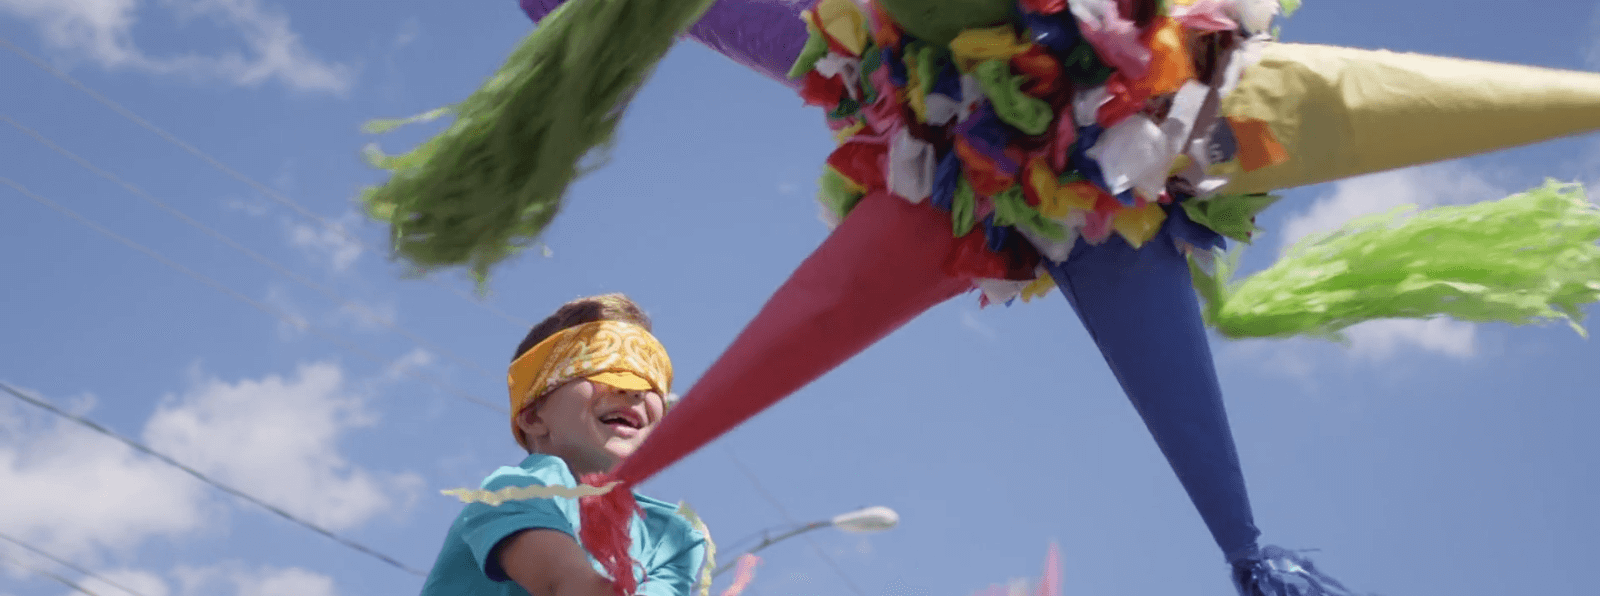 A blindfolded child swings at a colorful pinata outdoors